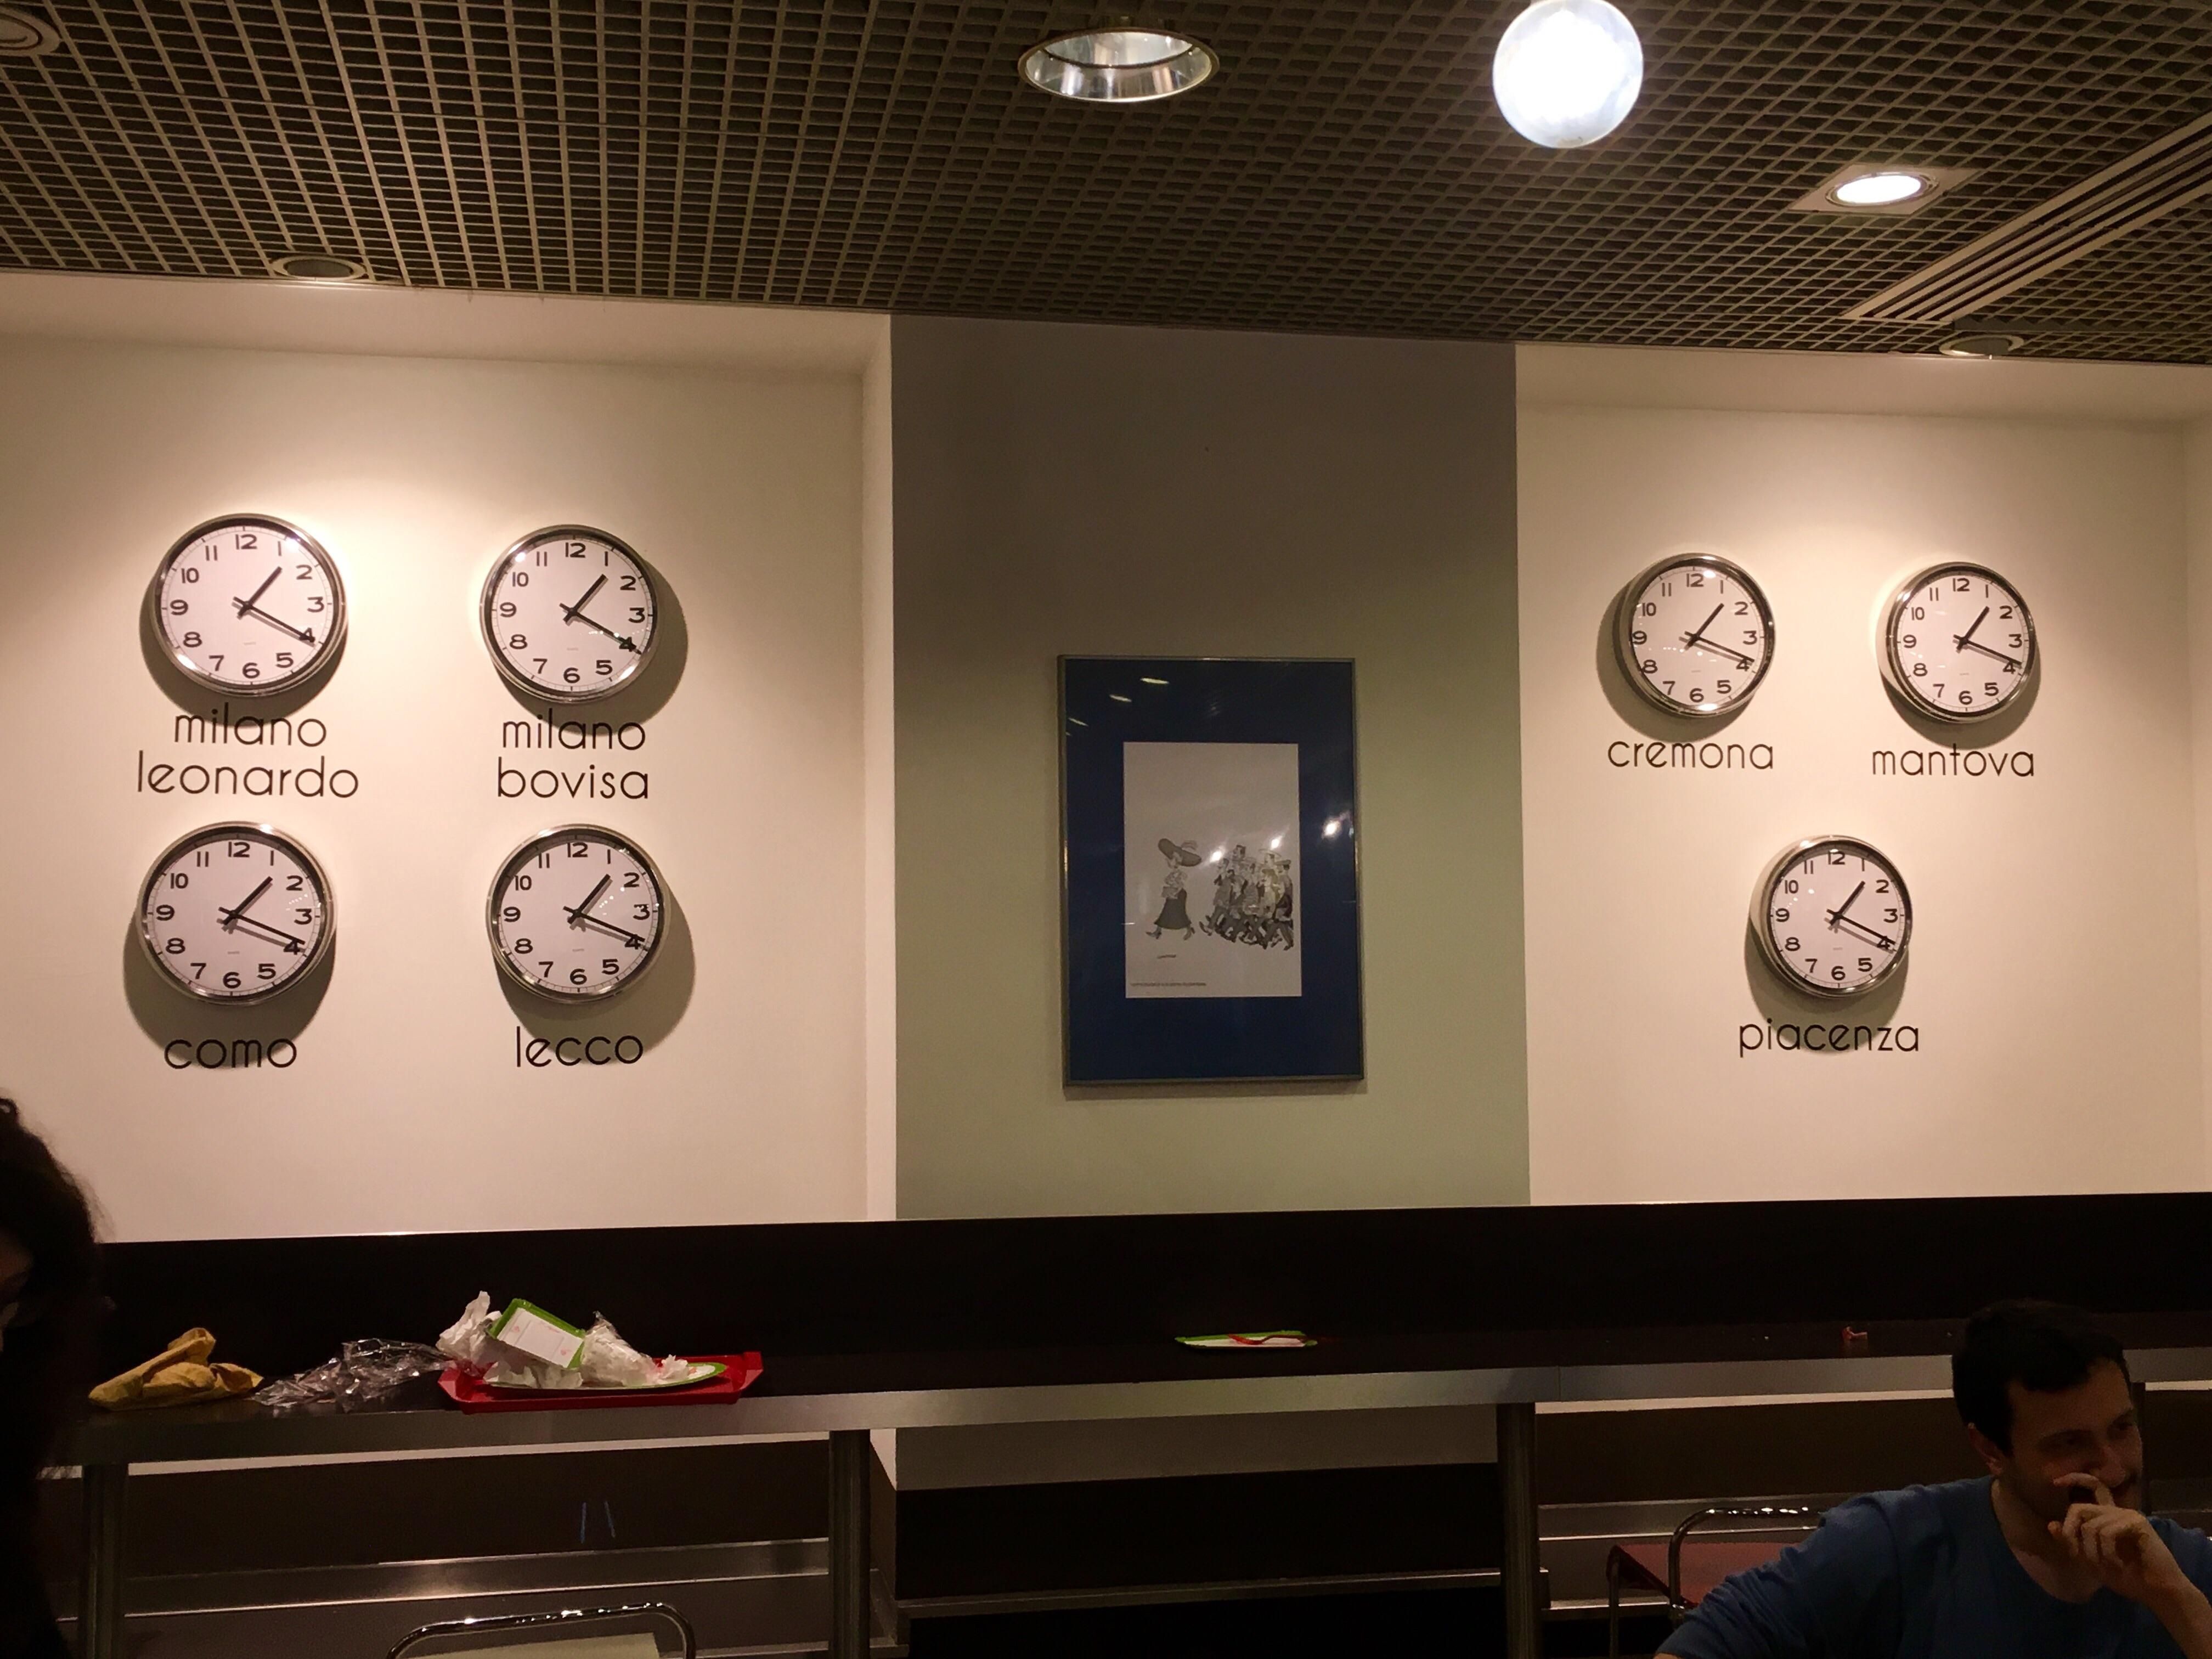 My university canteen has a wall clock for each of the university's campuses... except they are all in the same country, so all the clocks show the exact same time.